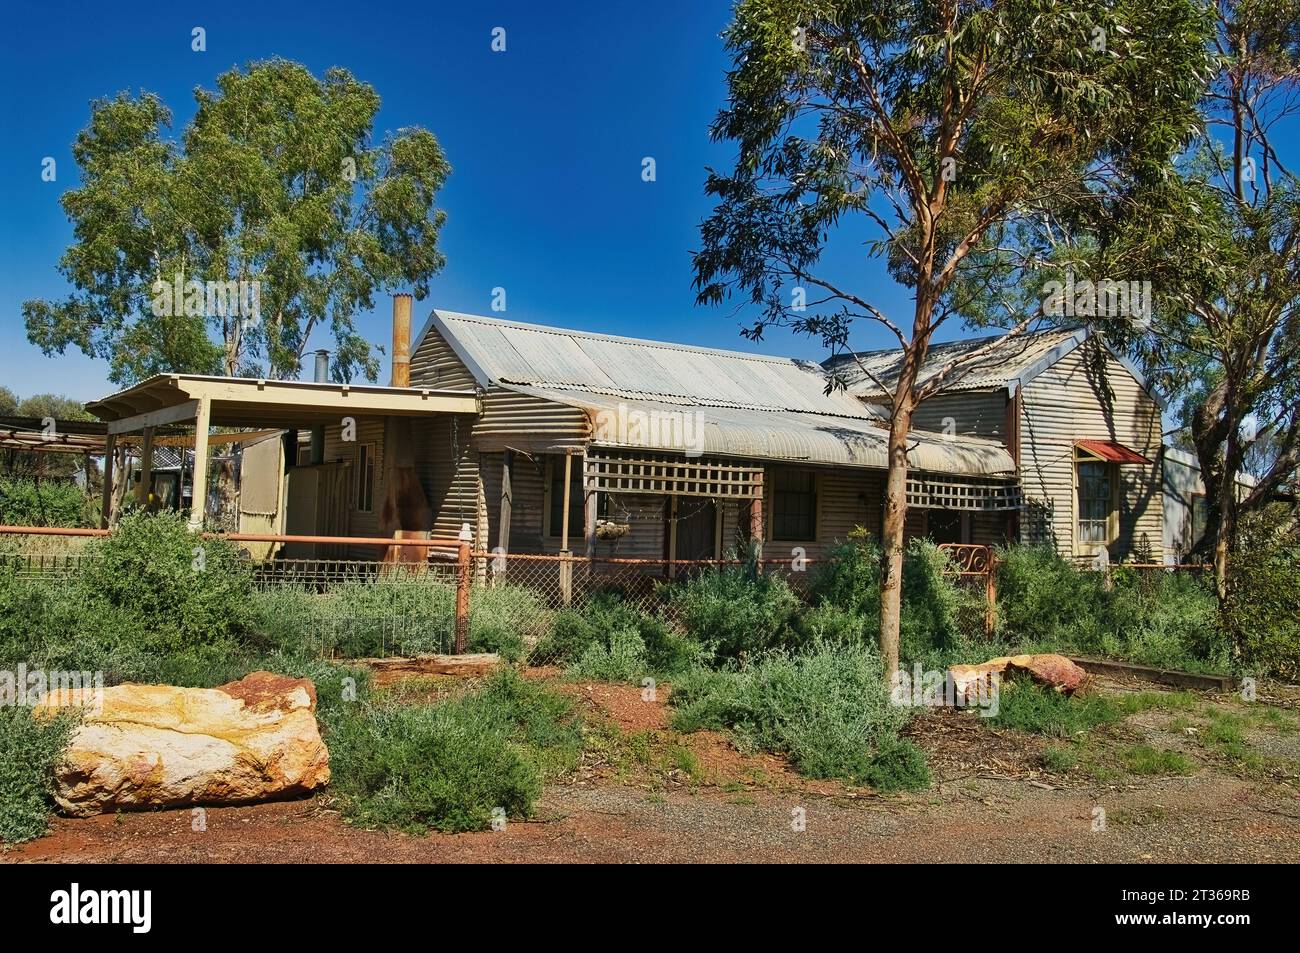 Abandoned cottage of corrugated iron and wood, with overgrown garden, in the former gold mining town of Kookynie, now a ghost town, Western Australia Stock Photo